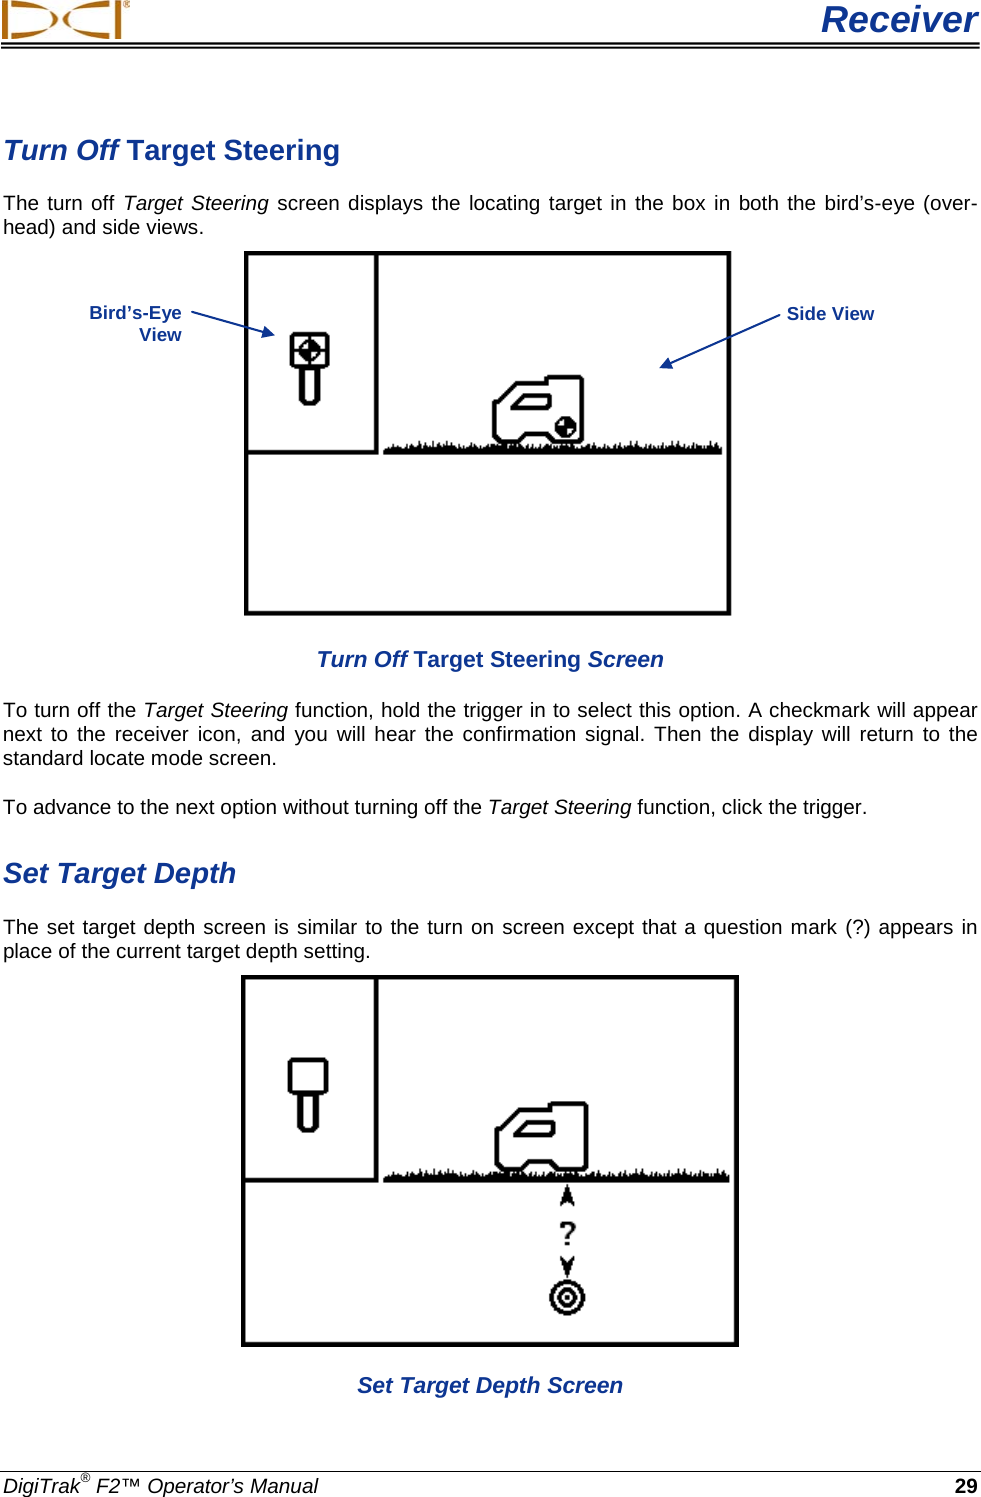  Receiver DigiTrak® F2™ Operator’s Manual 29 Turn Off Target Steering The turn off Target Steering screen displays the locating target in the box in both the bird’s-eye (over-head) and side views.  Turn Off Target Steering Screen  To turn off the Target Steering function, hold the trigger in to select this option. A checkmark will appear next to the receiver icon, and you will hear the confirmation signal. Then the display will return to the standard locate mode screen.  To advance to the next option without turning off the Target Steering function, click the trigger.  Set Target Depth The set target depth screen is similar to the turn on screen except that a question mark (?) appears in place of the current target depth setting.   Set Target Depth Screen Bird’s-Eye View Side View 